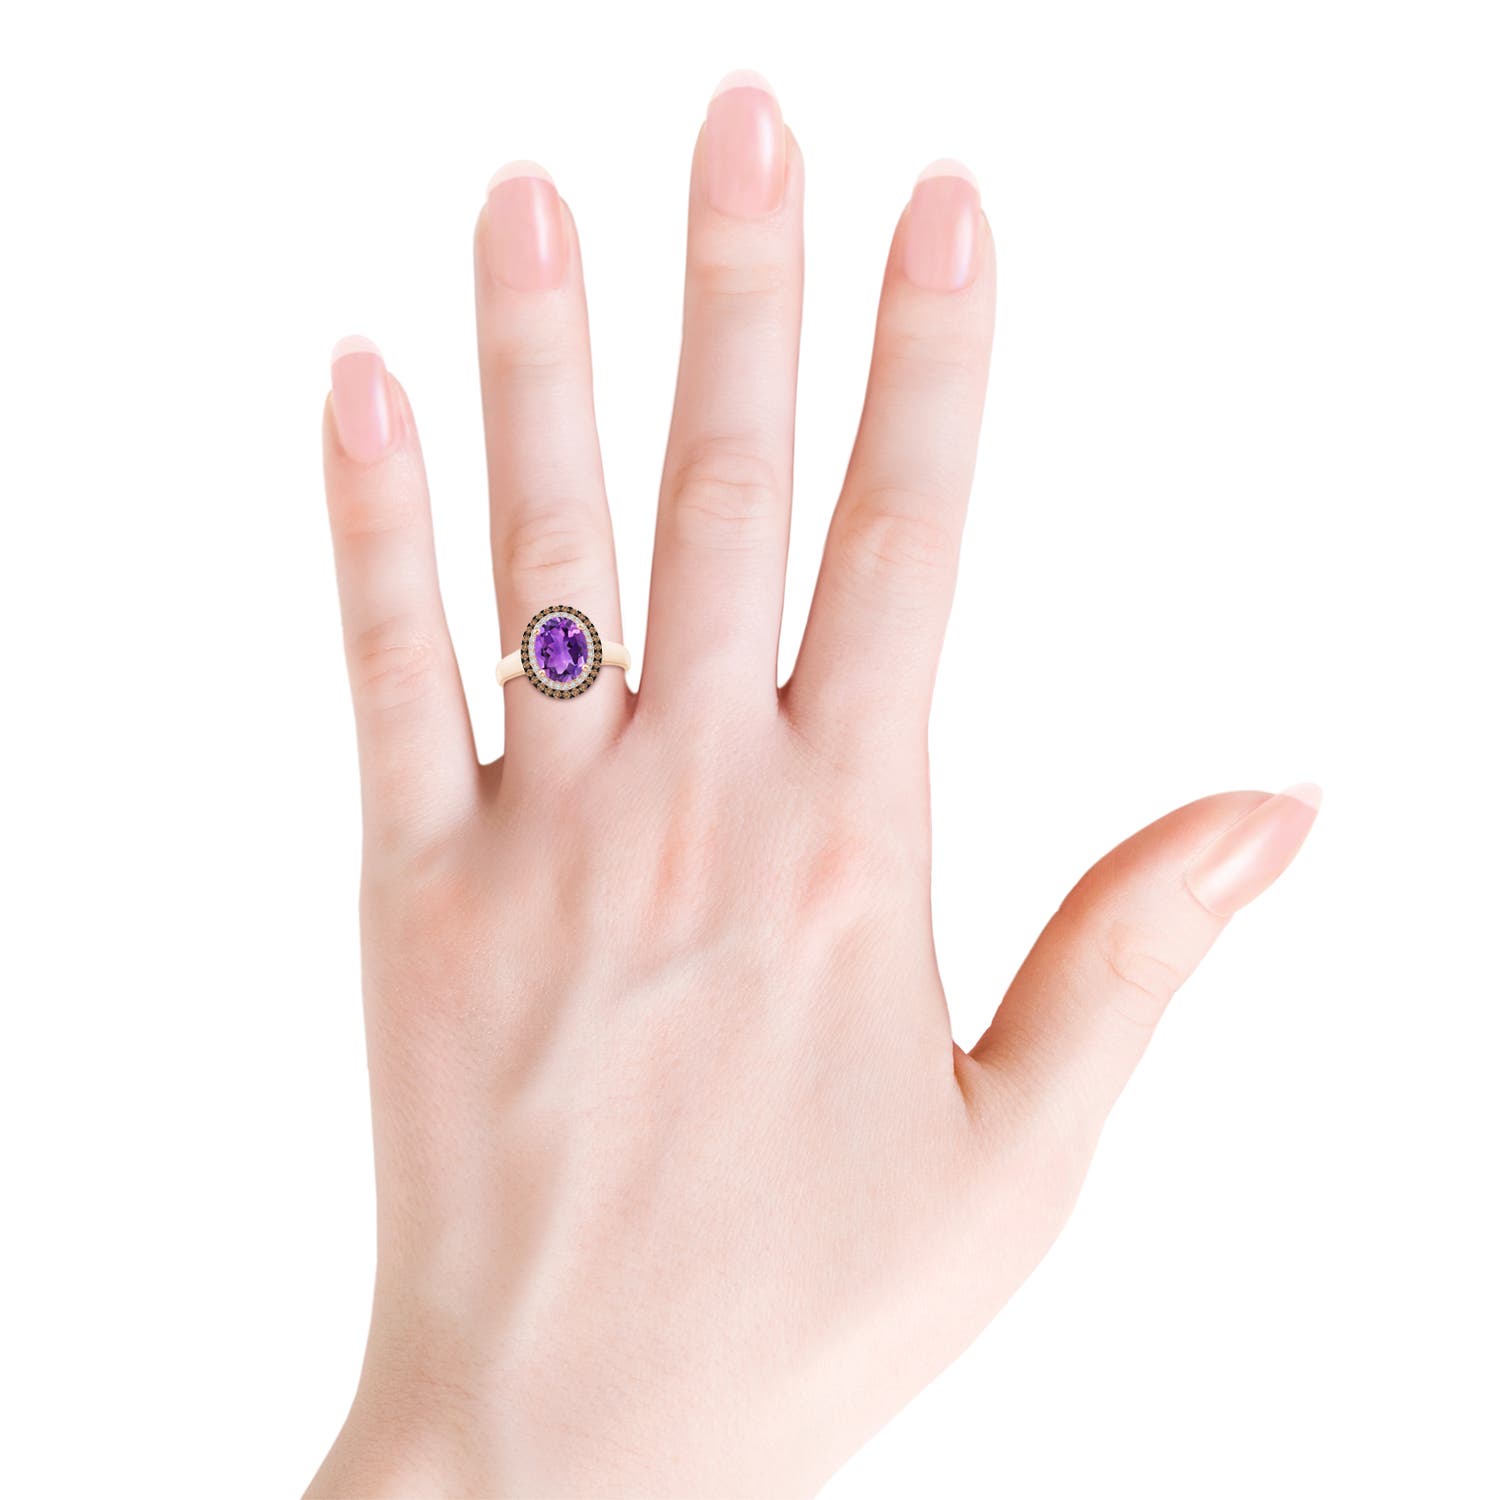 AAA - Amethyst / 1.87 CT / 14 KT Rose Gold